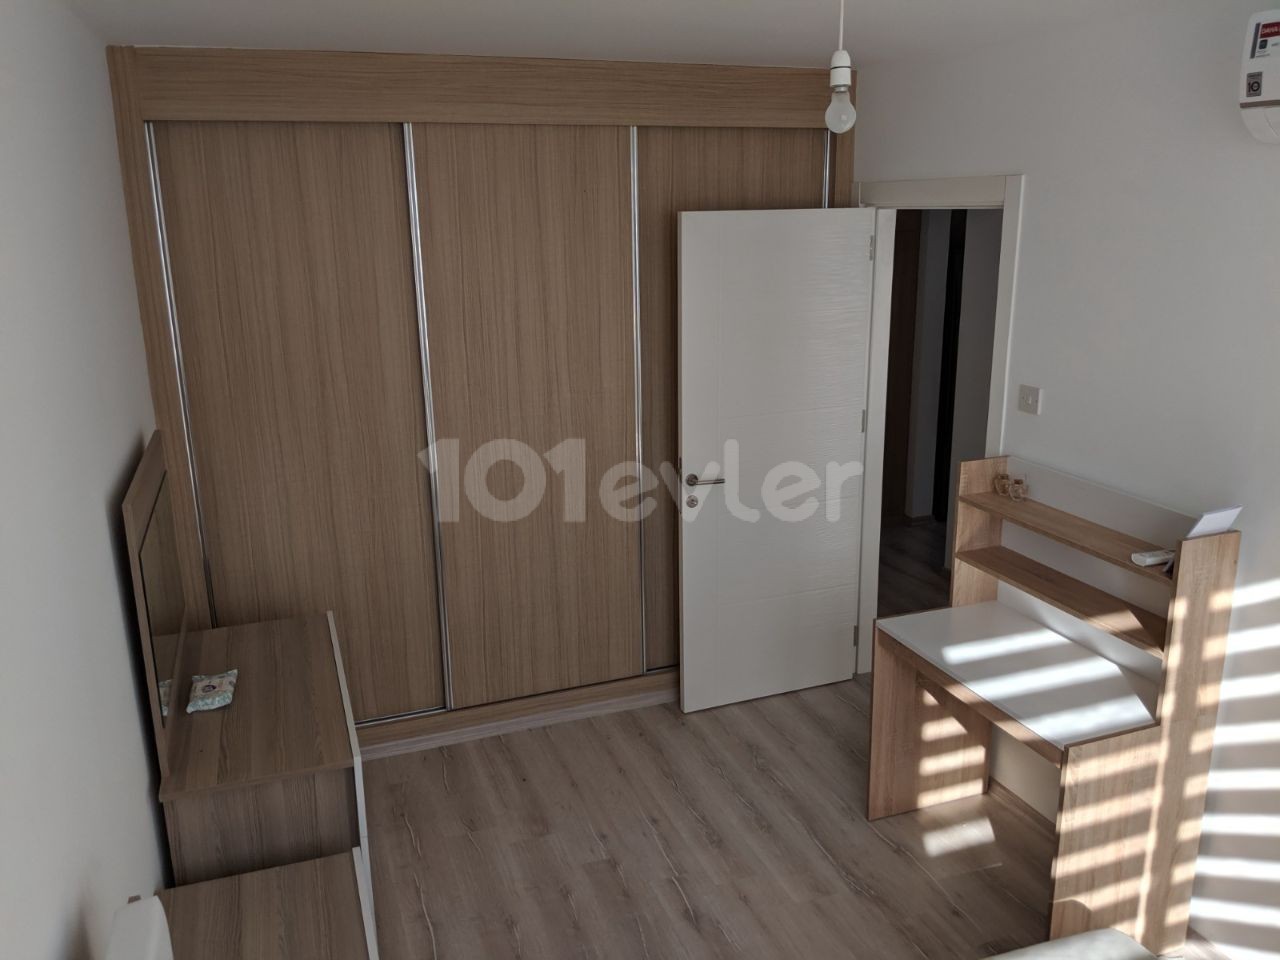 FULL PRICE 2+1 APARTMENT WITHIN WALKING DISTANCE OF FAMAGUSTA EMU ** 